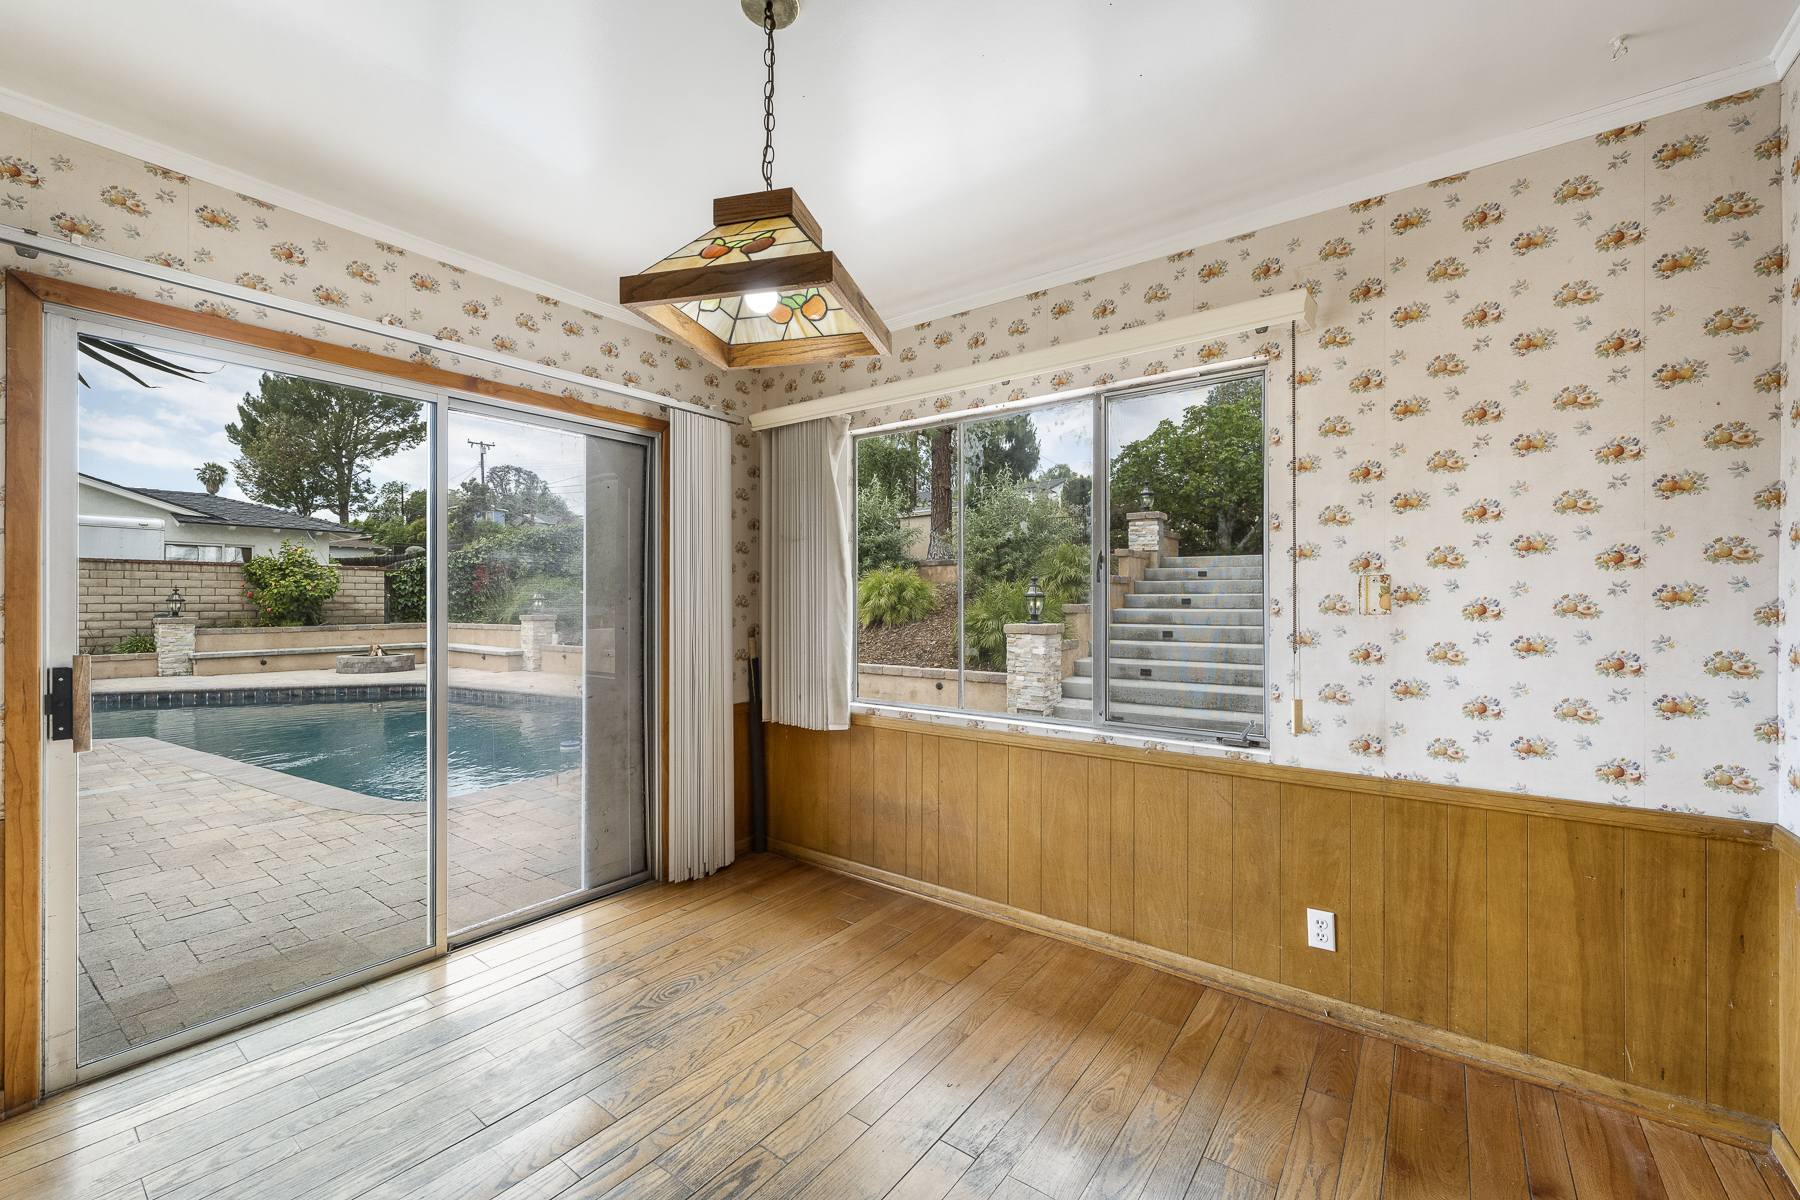 501 Dorothy Drive: breakfast area with view of pool